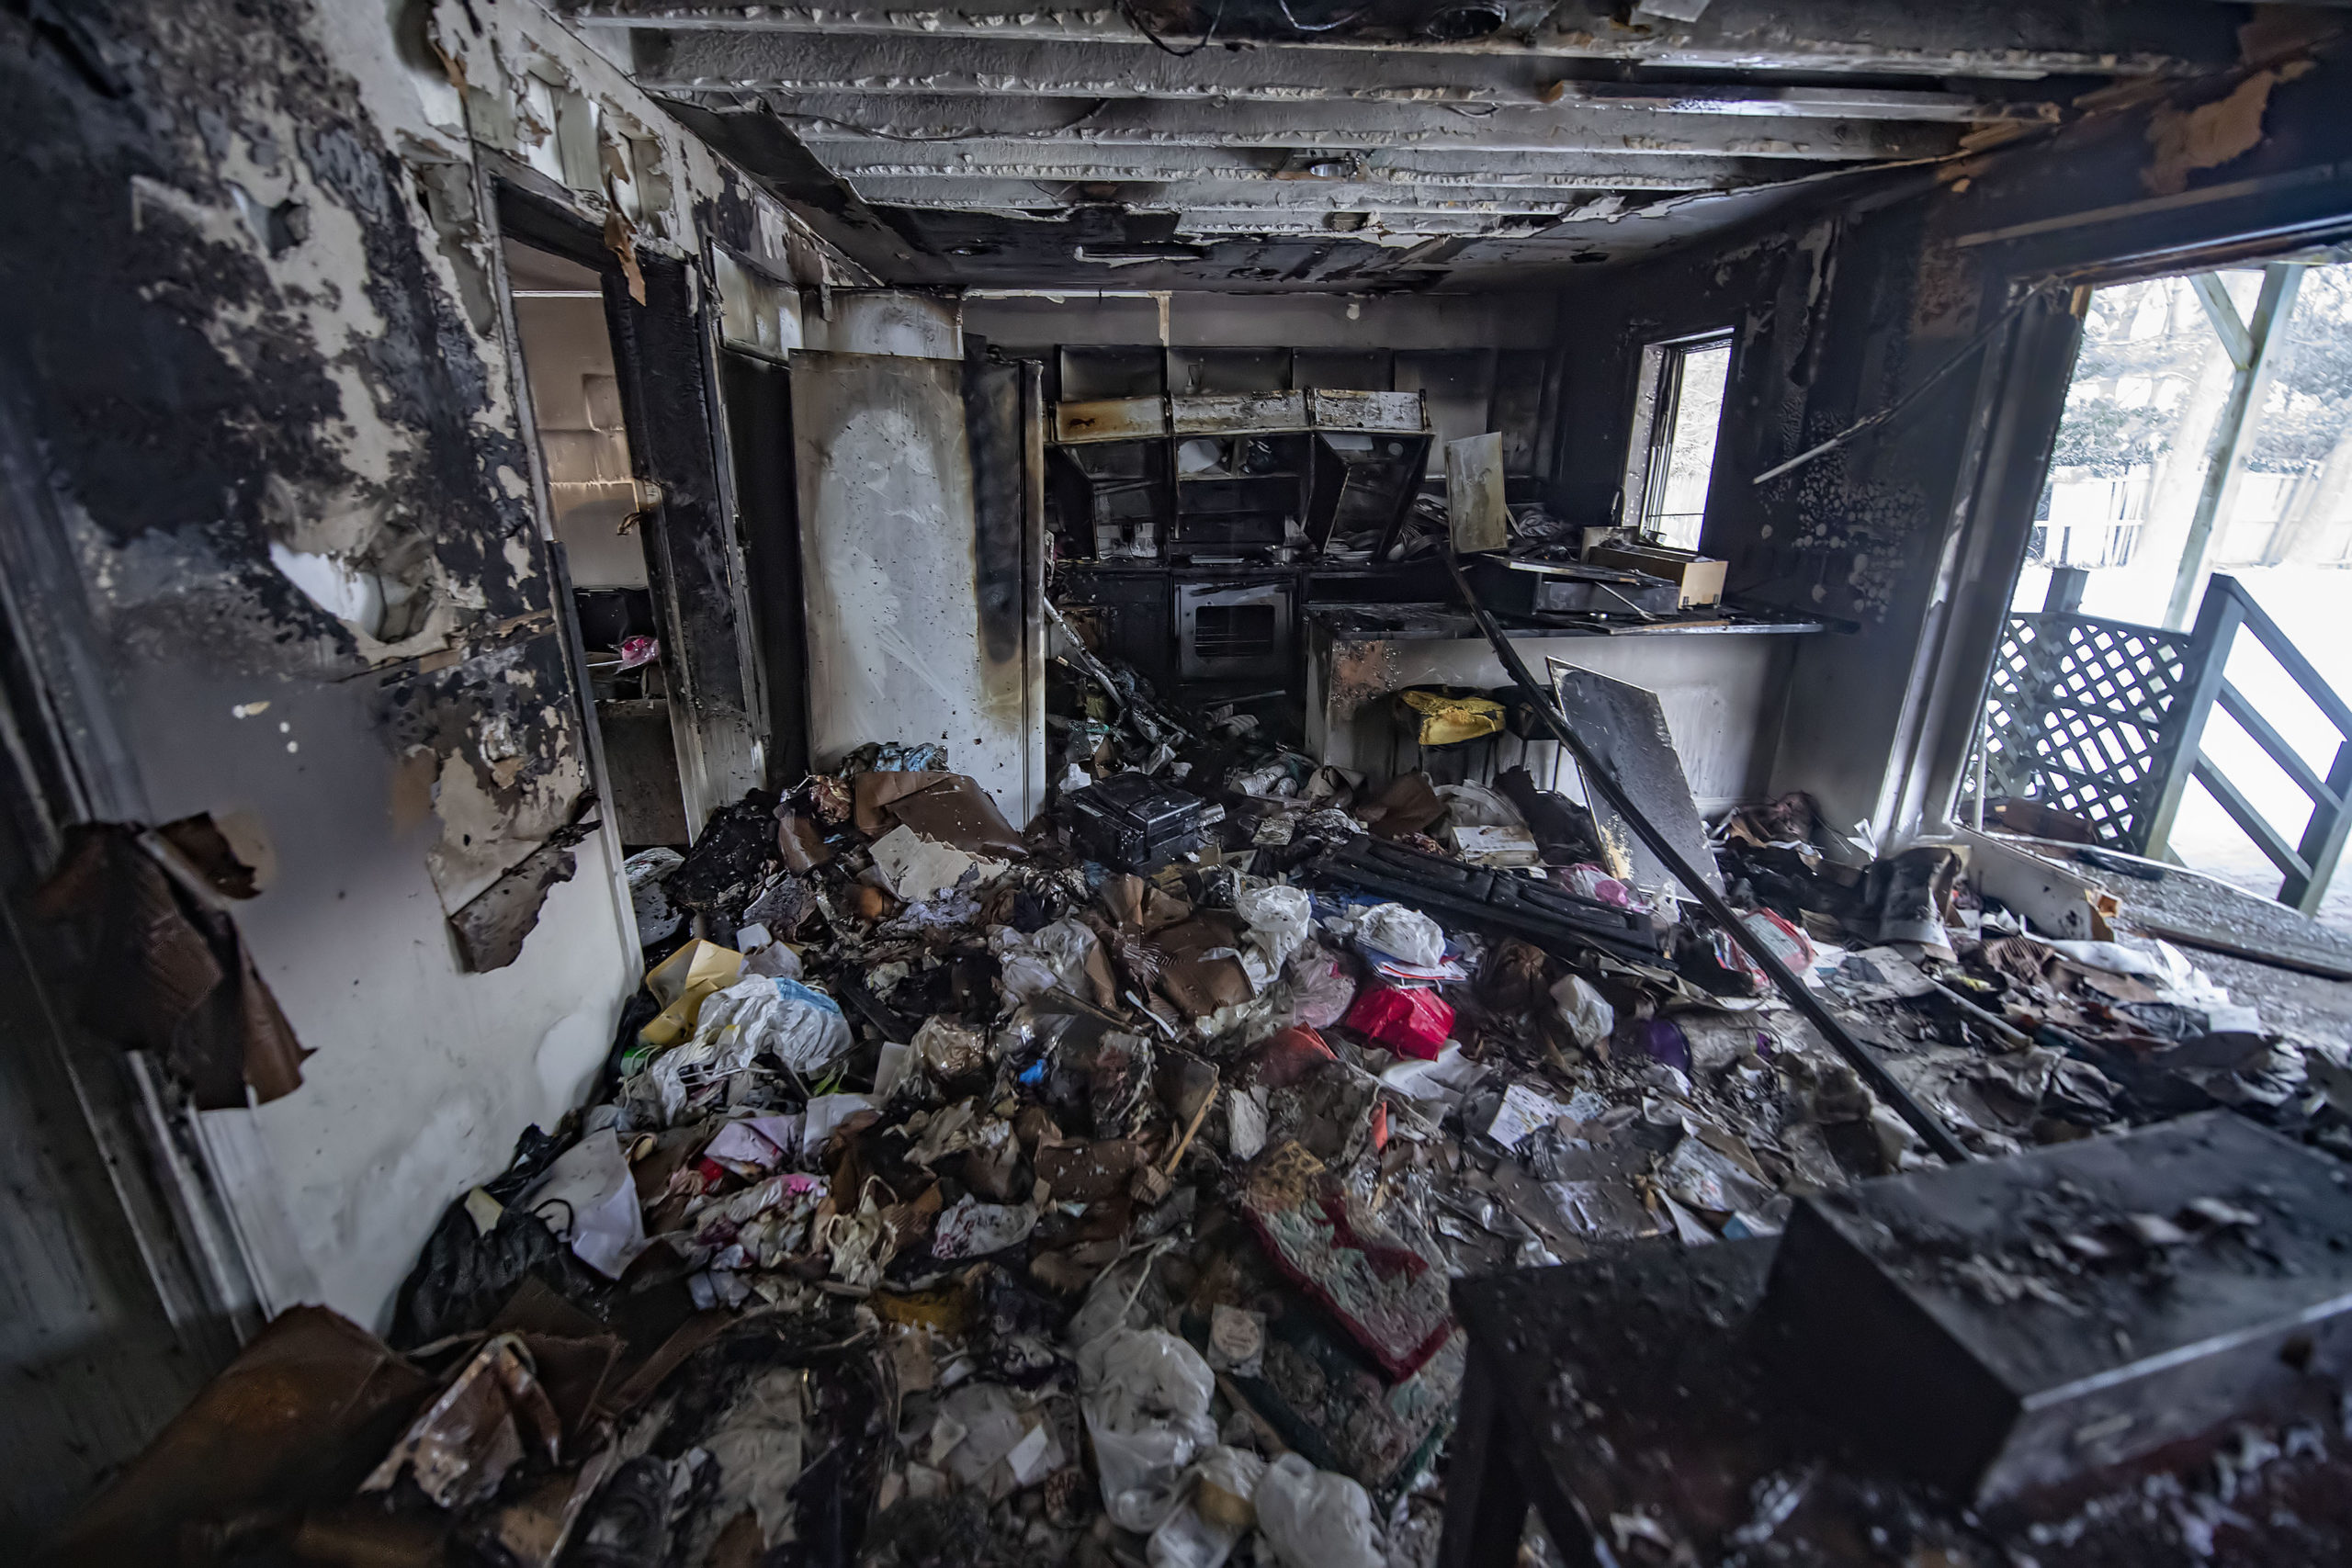 A view inside the kitchen area inside the residence following the working house fire at 38 Cove Hollow Road in East Hampton on Saturday.  MICHAEL HELLER